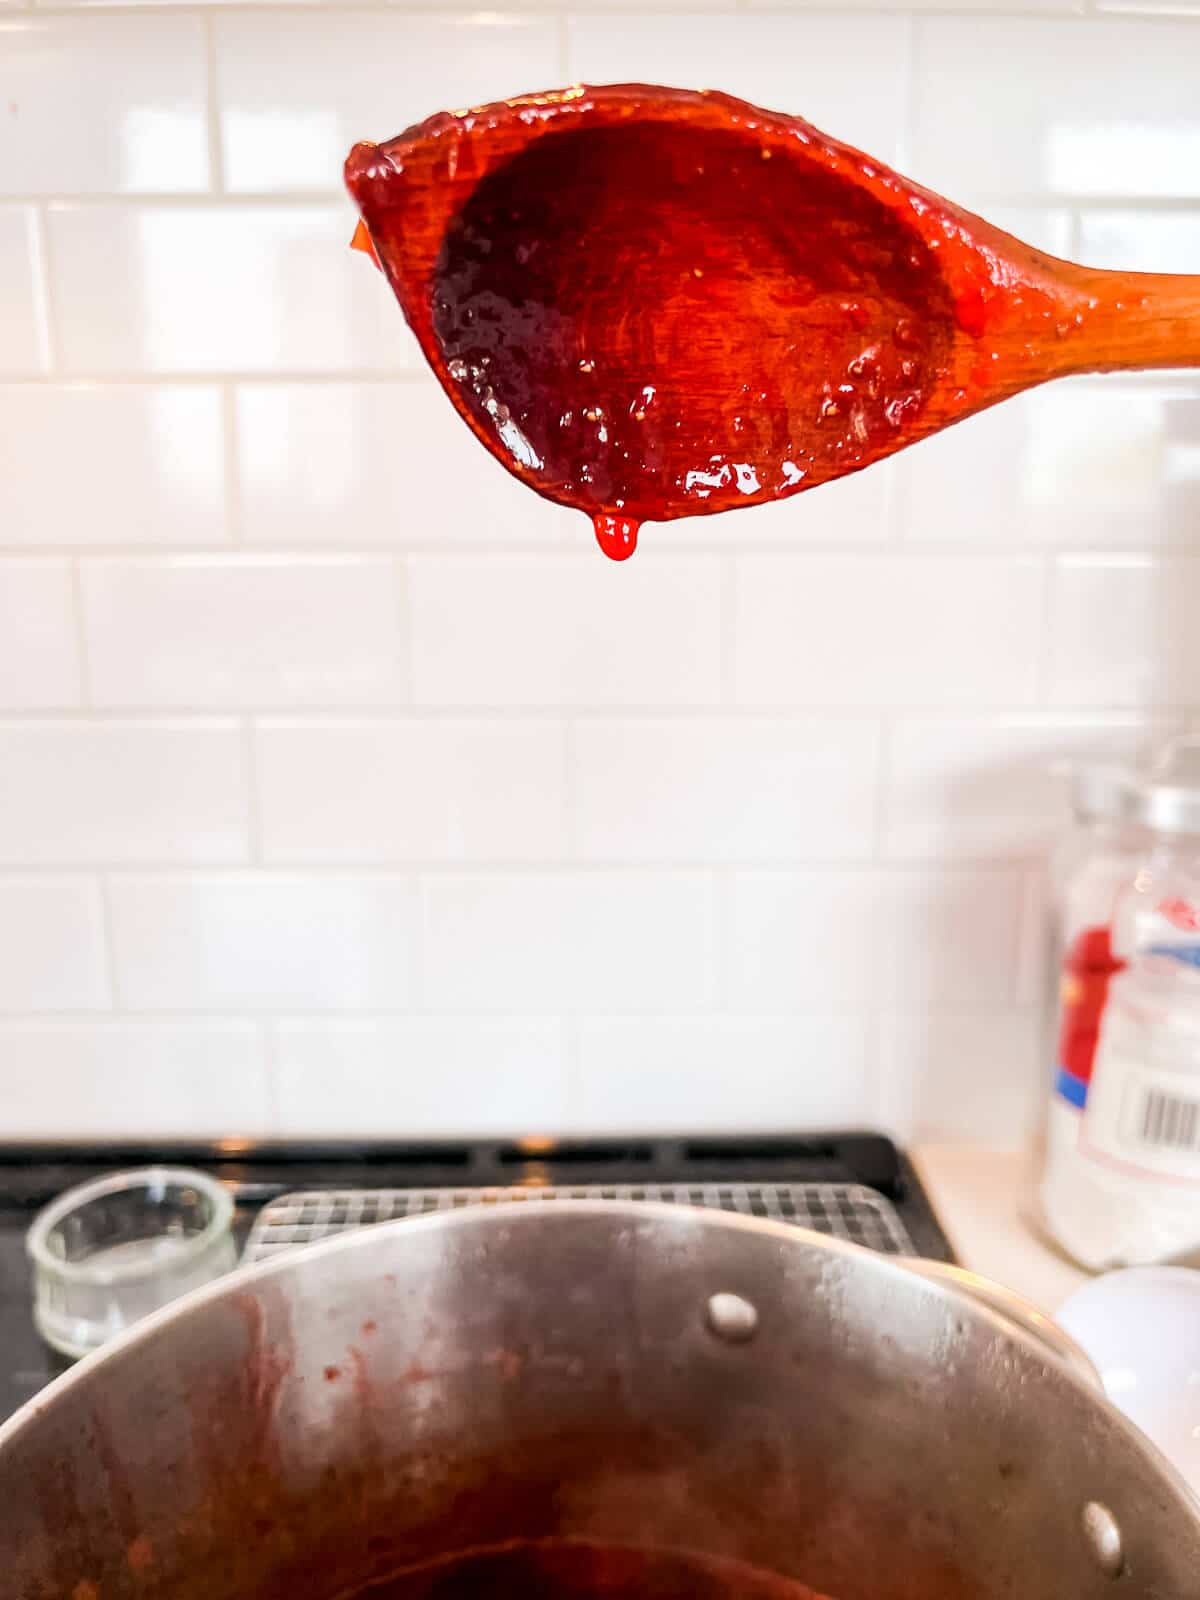 Lifting a wooden spoon of boiling jam above the pot to see if it clings to the spoon (also called sheeting), a sign that it has reached the setting point.